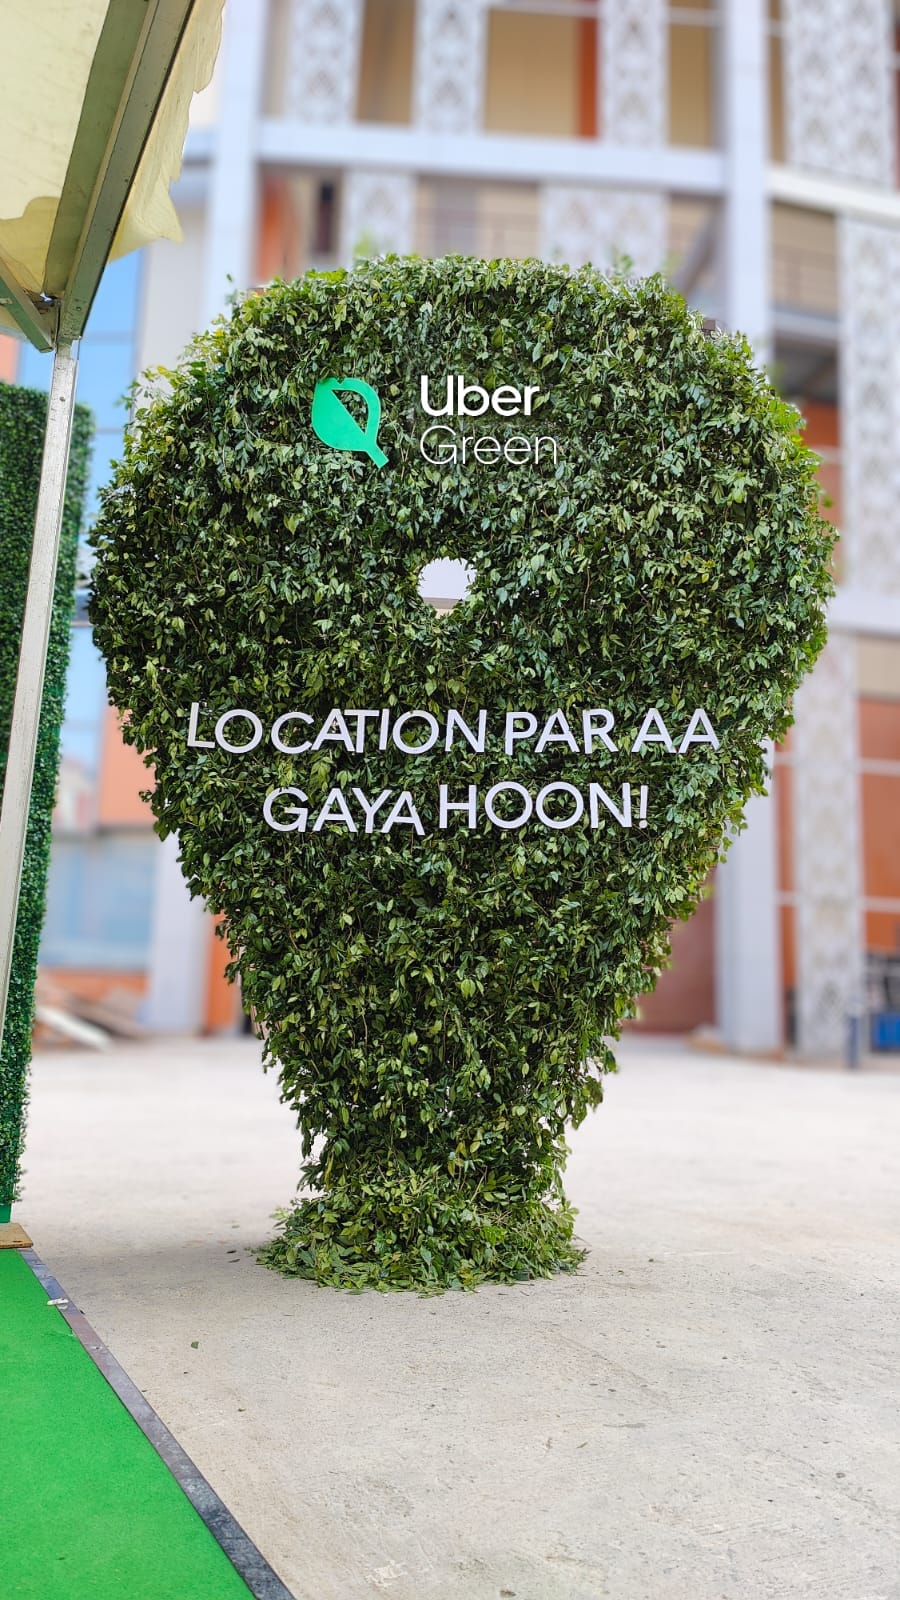 Get Uber Green rides anywhere in Delhi now